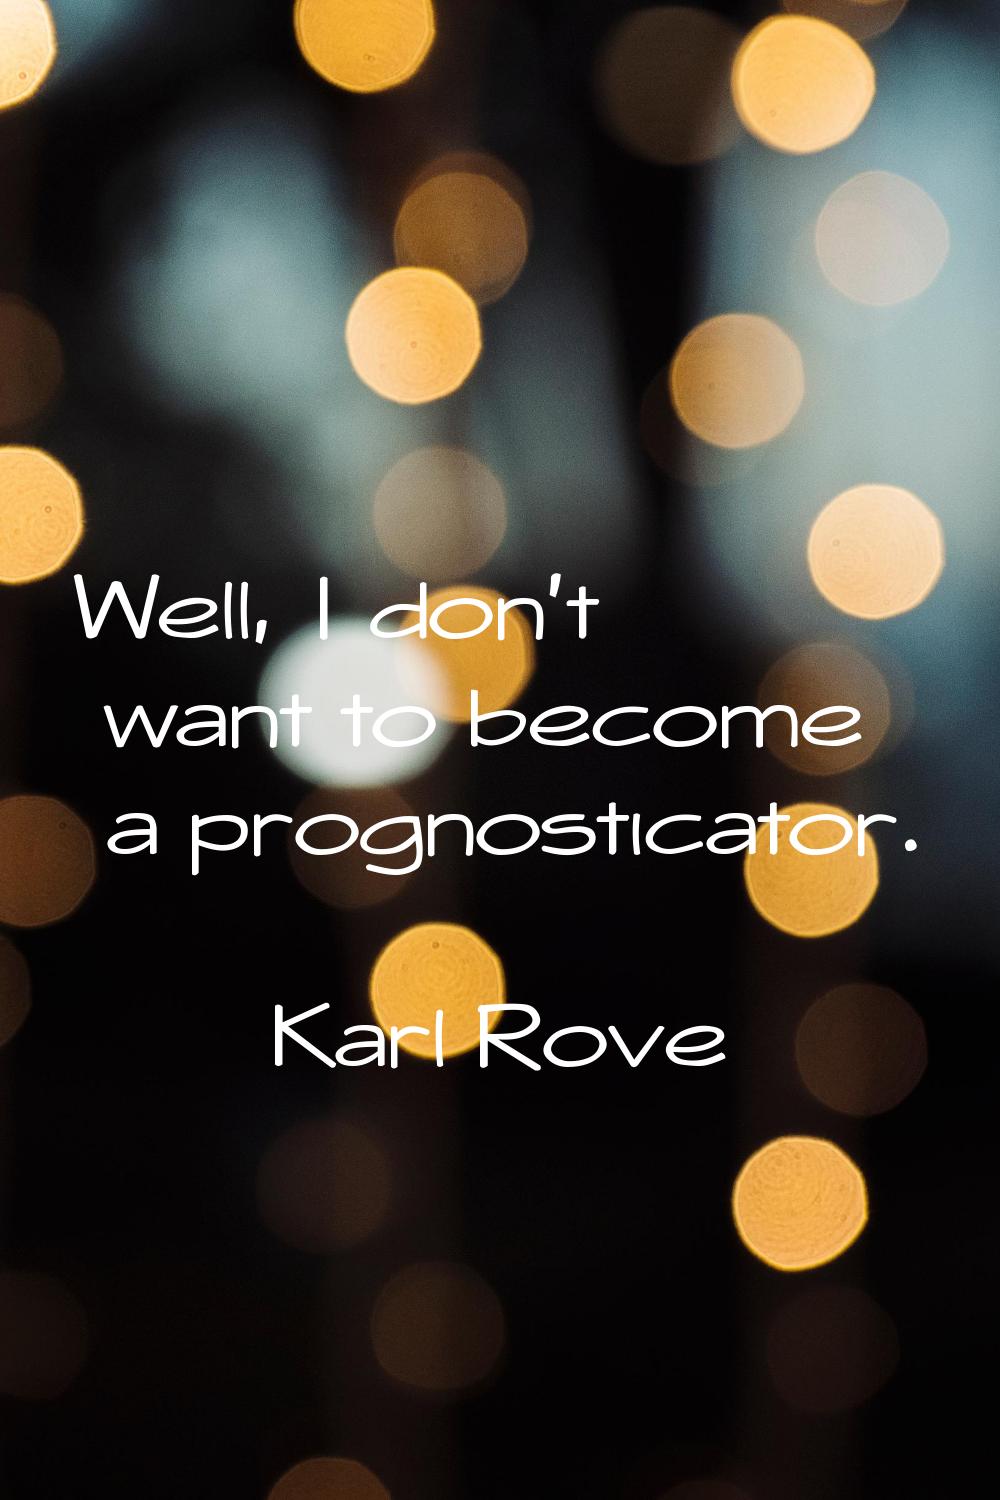 Well, I don't want to become a prognosticator.